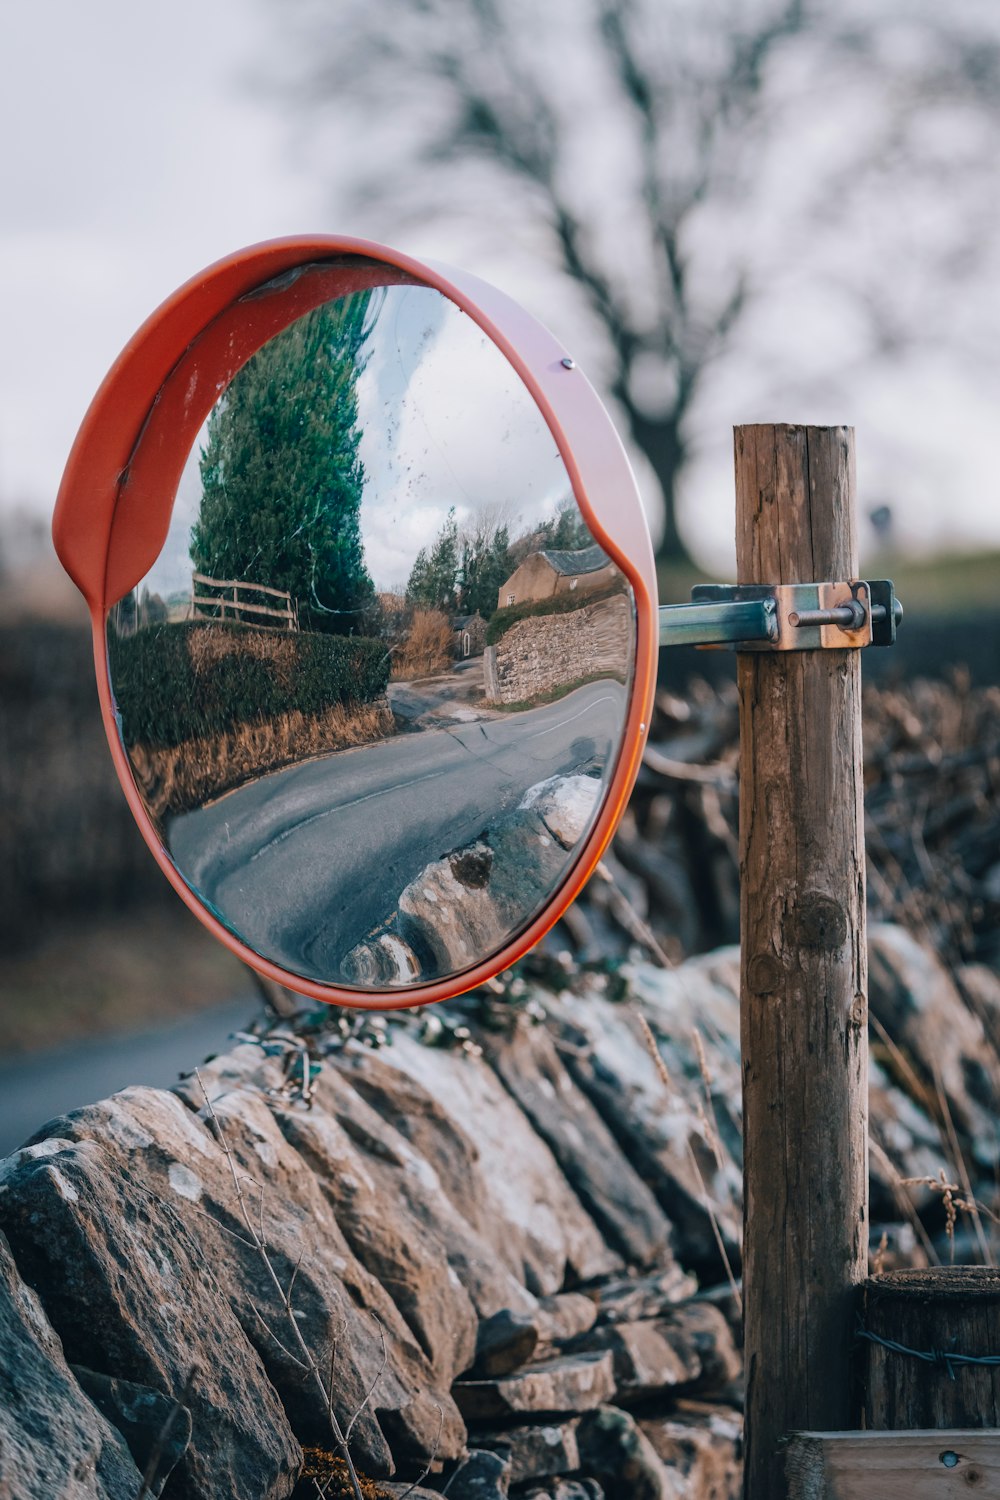 a red mirror on a wooden pole next to a road